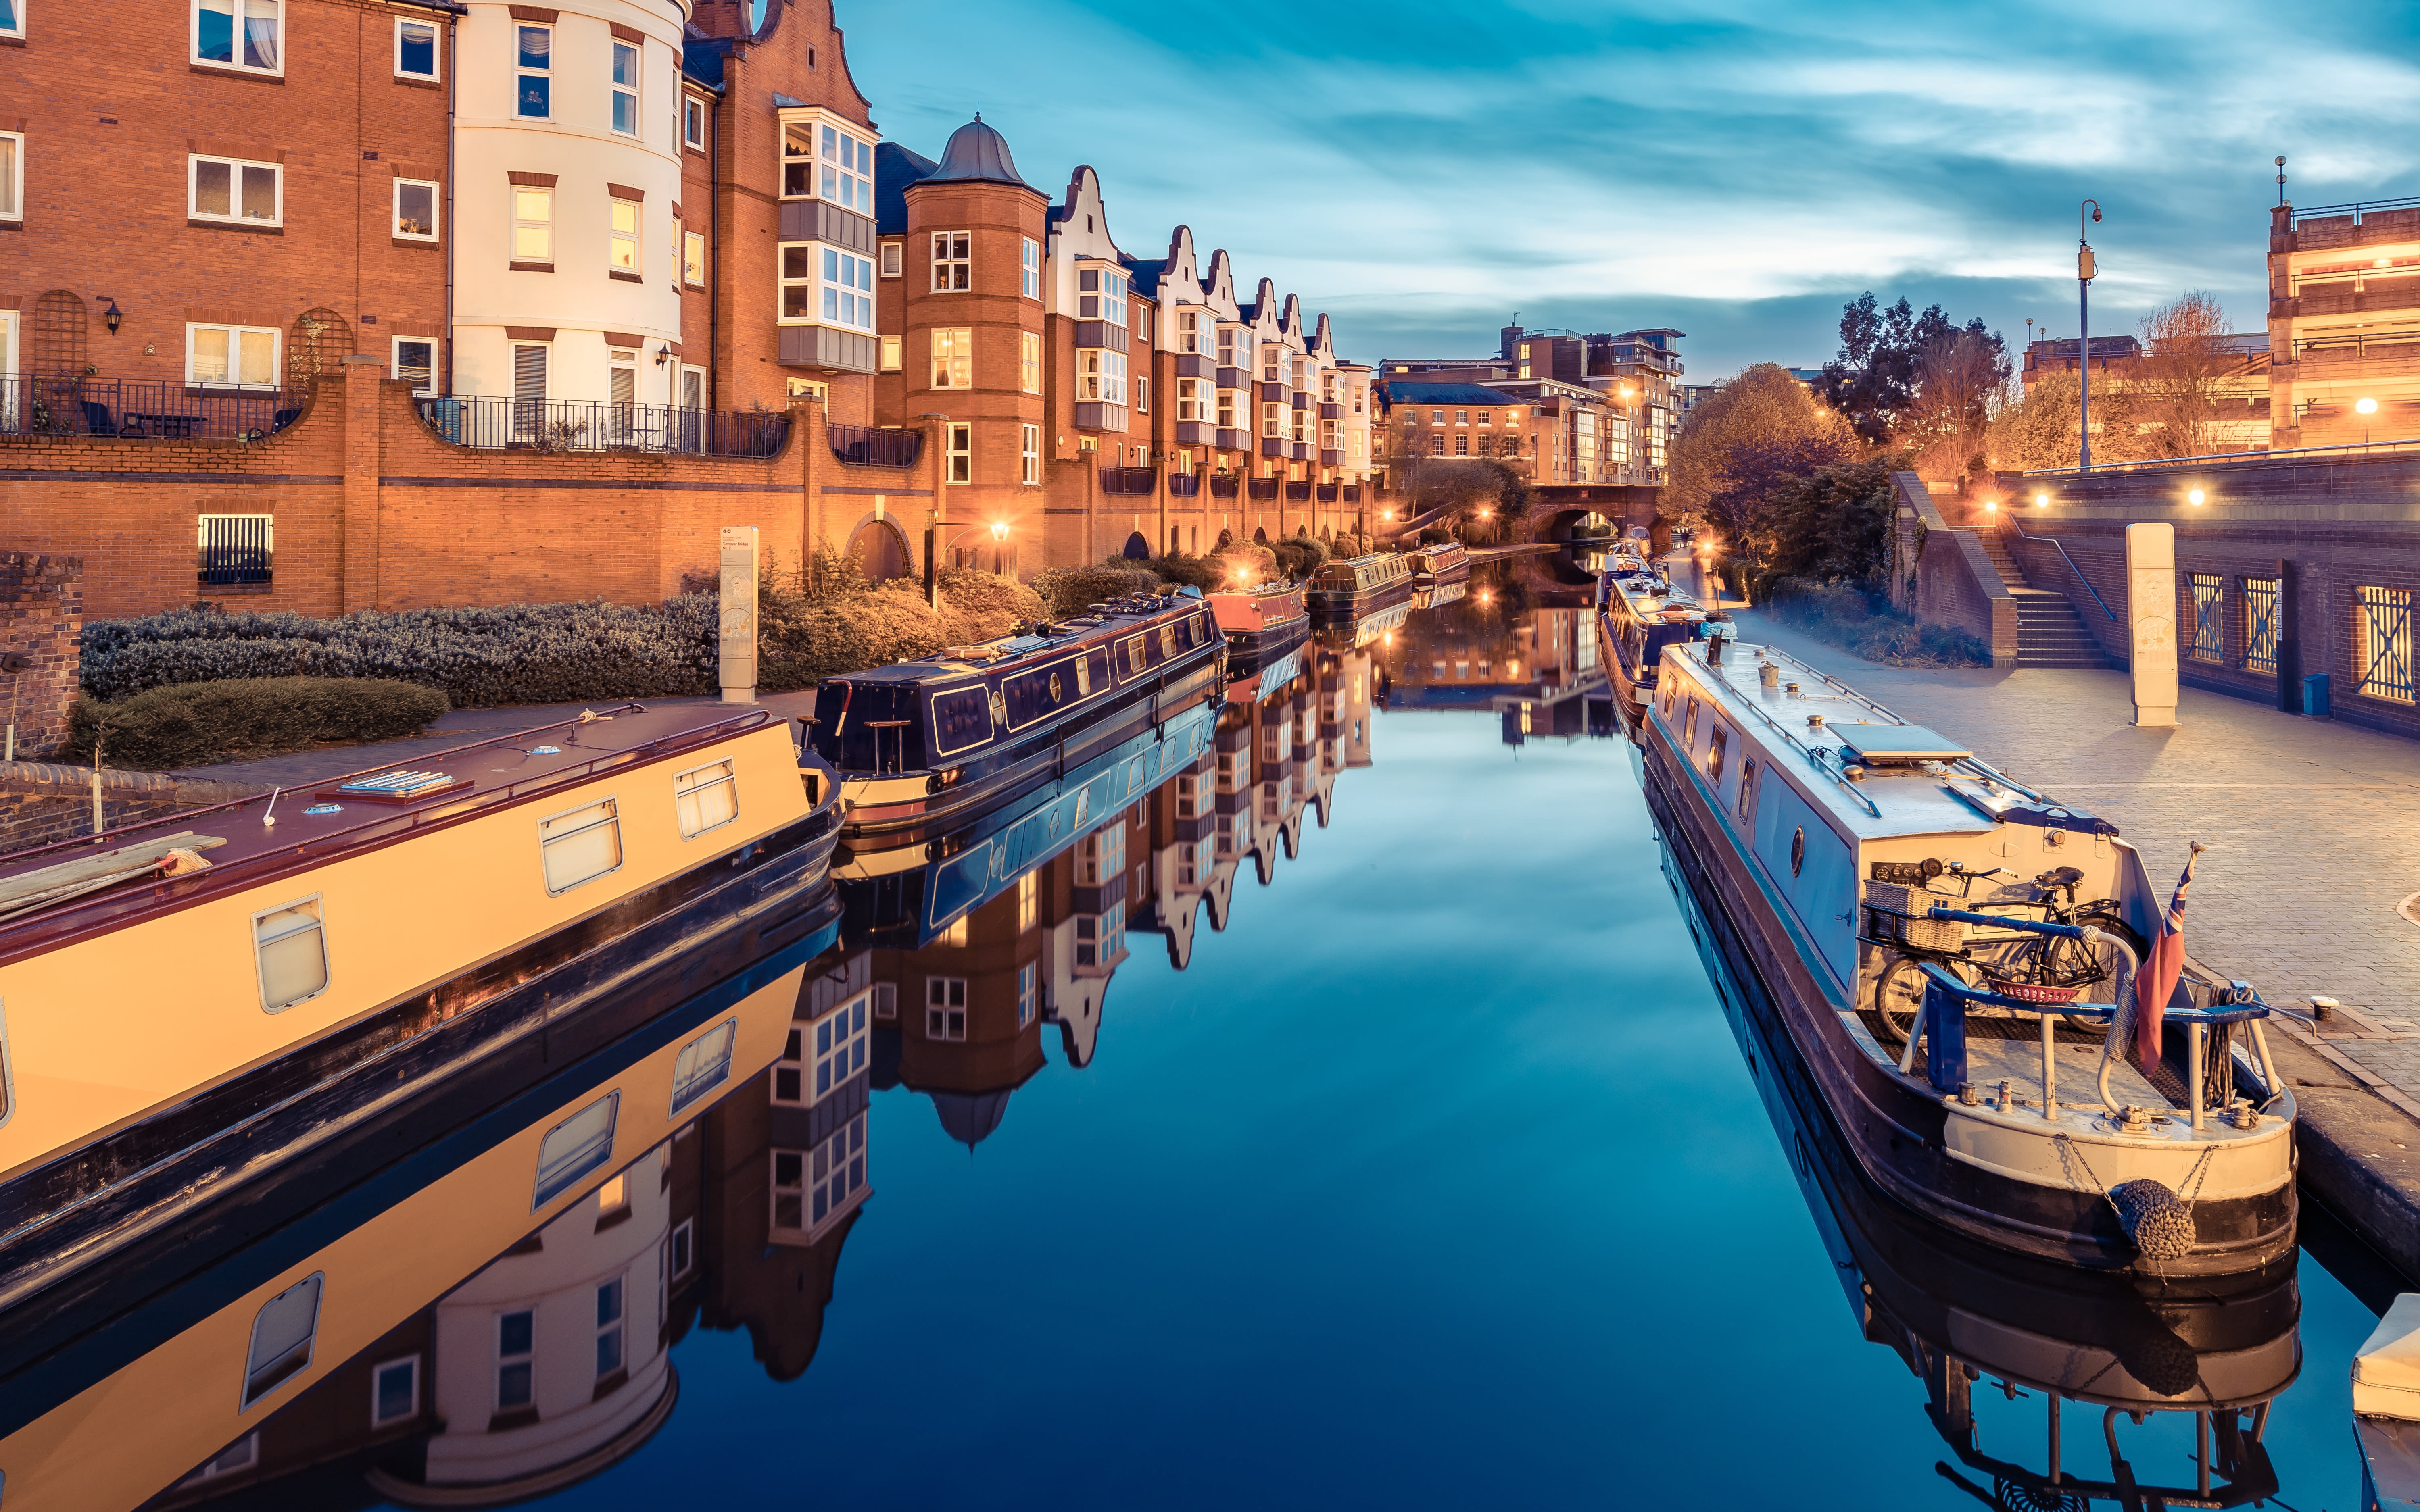 Image of a canal in Birmingham, England.